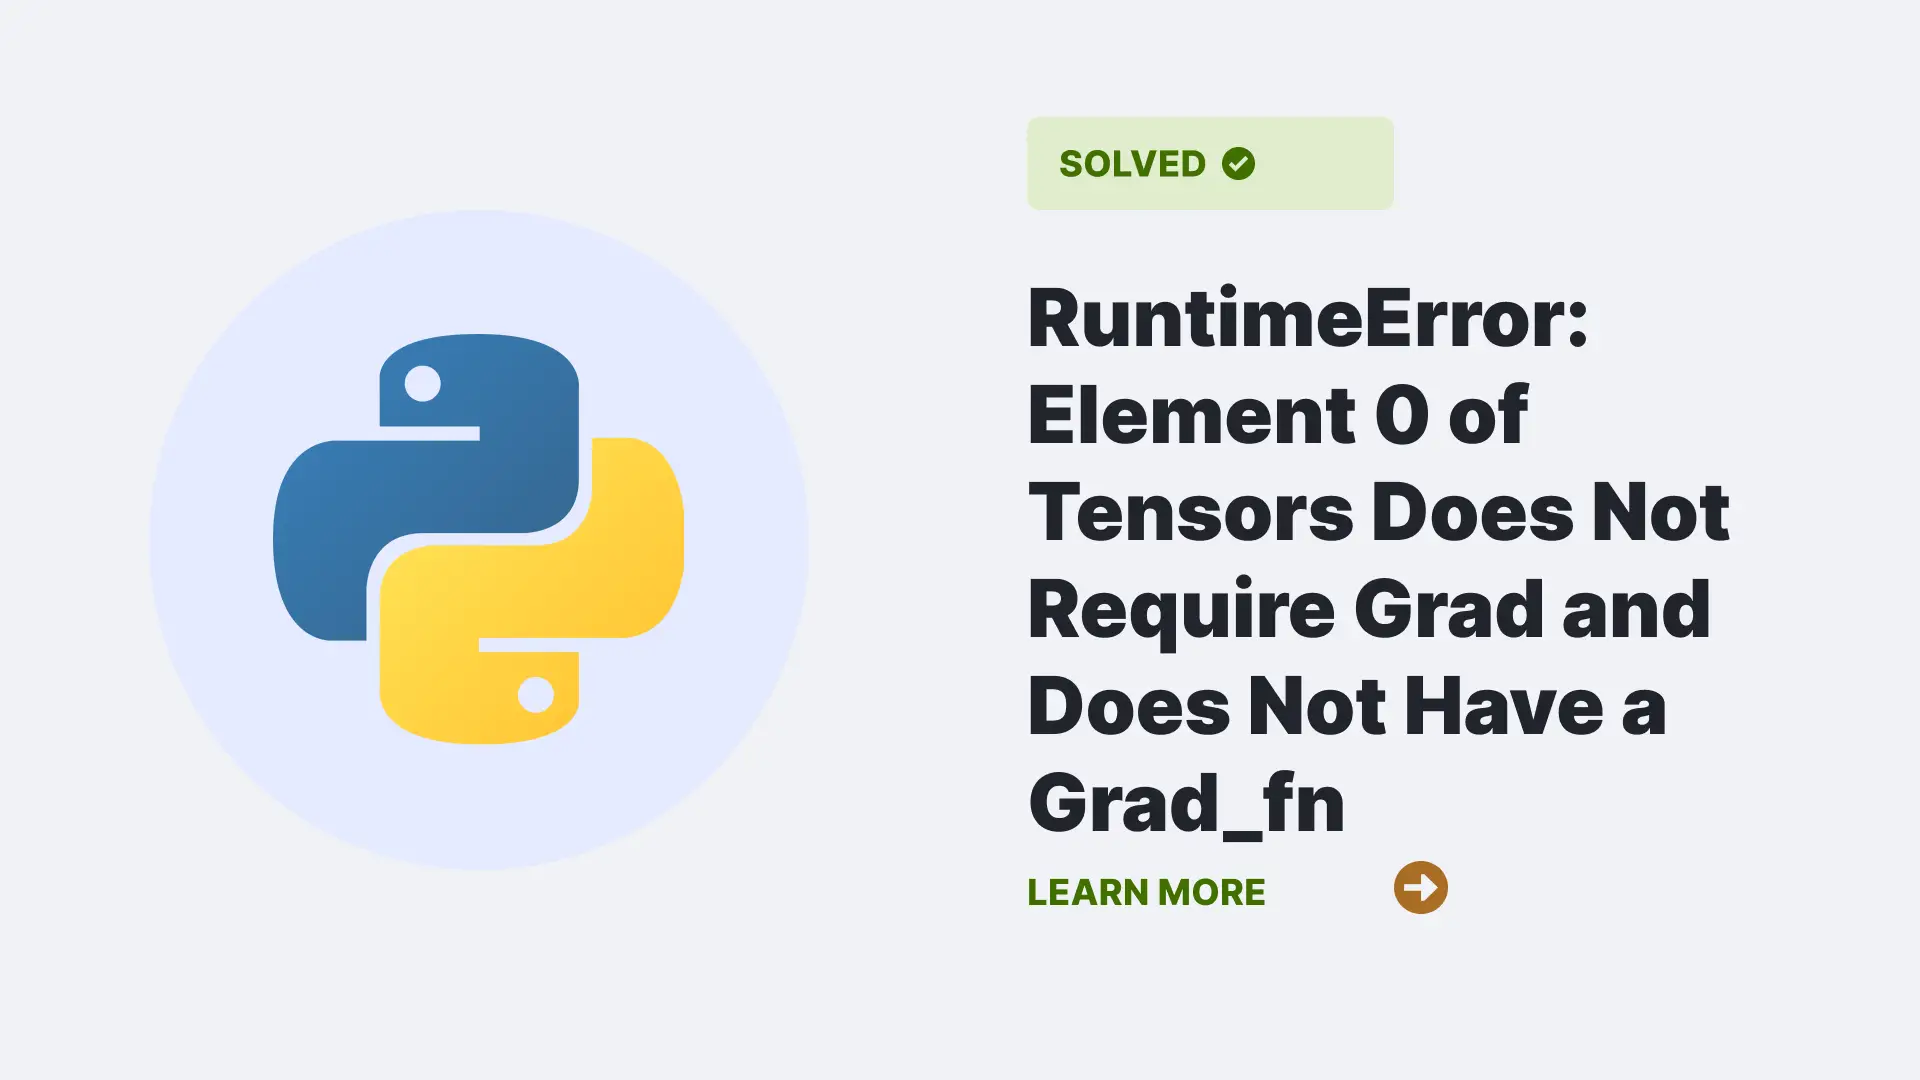 RuntimeError: Element 0 of Tensors Does Not Require Grad and Does Not Have a Grad_fn